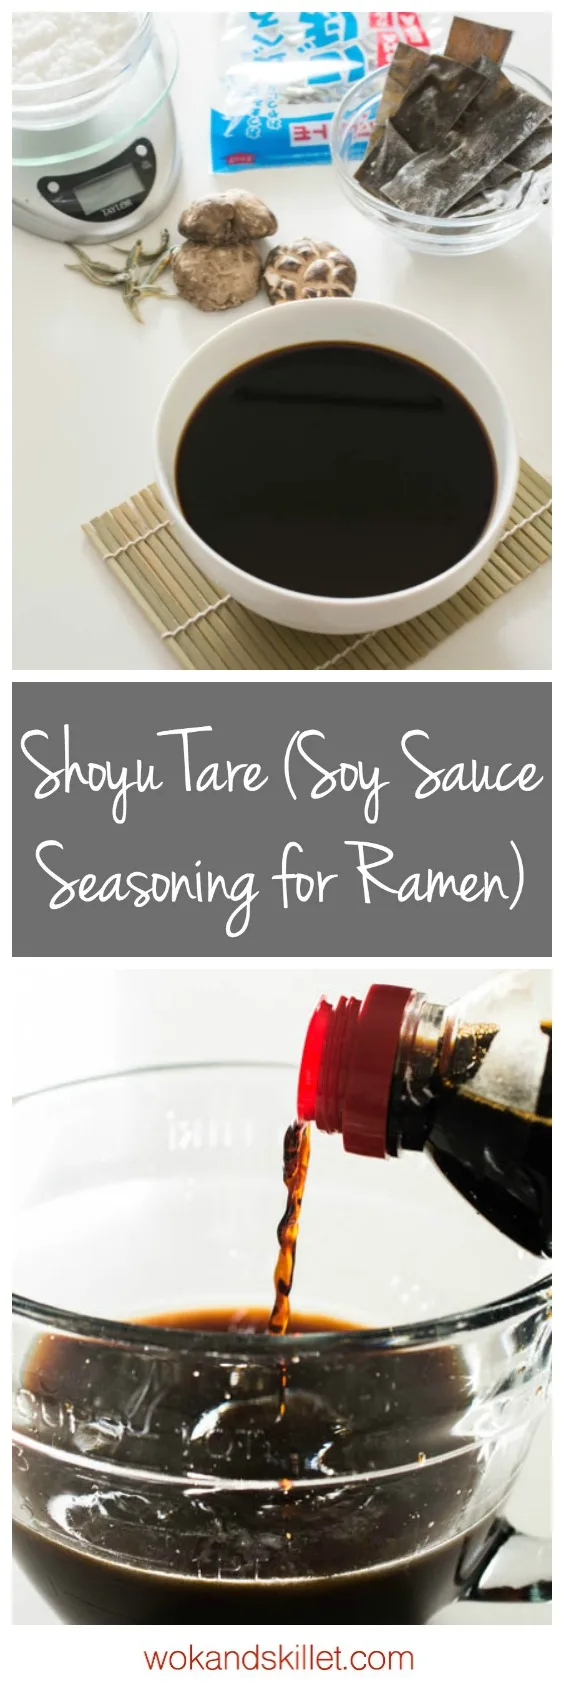 Shoyu Tare is the soy sauce seasoning and concentrated flavor base used in Japanese Shoyu Ramen; one of the most important elements in a good bowl of ramen.